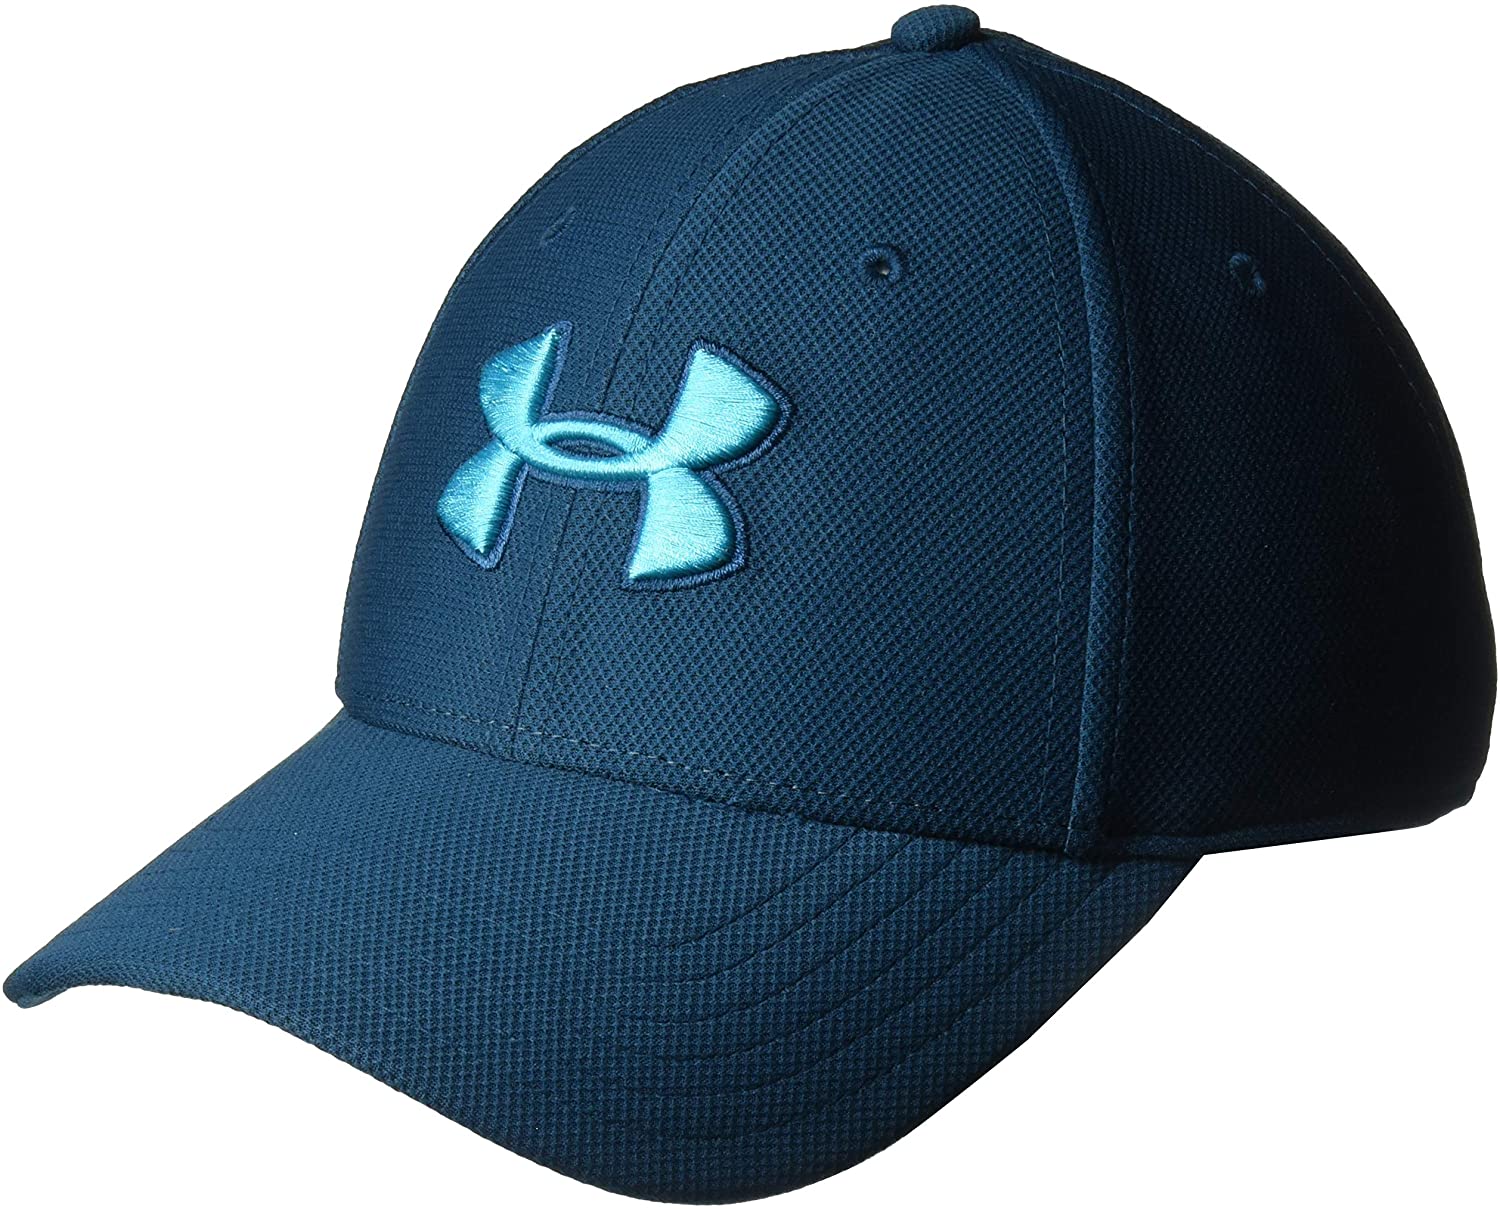 Under Armour Mens Heathered Blitzing 3.0 Cap Hat 